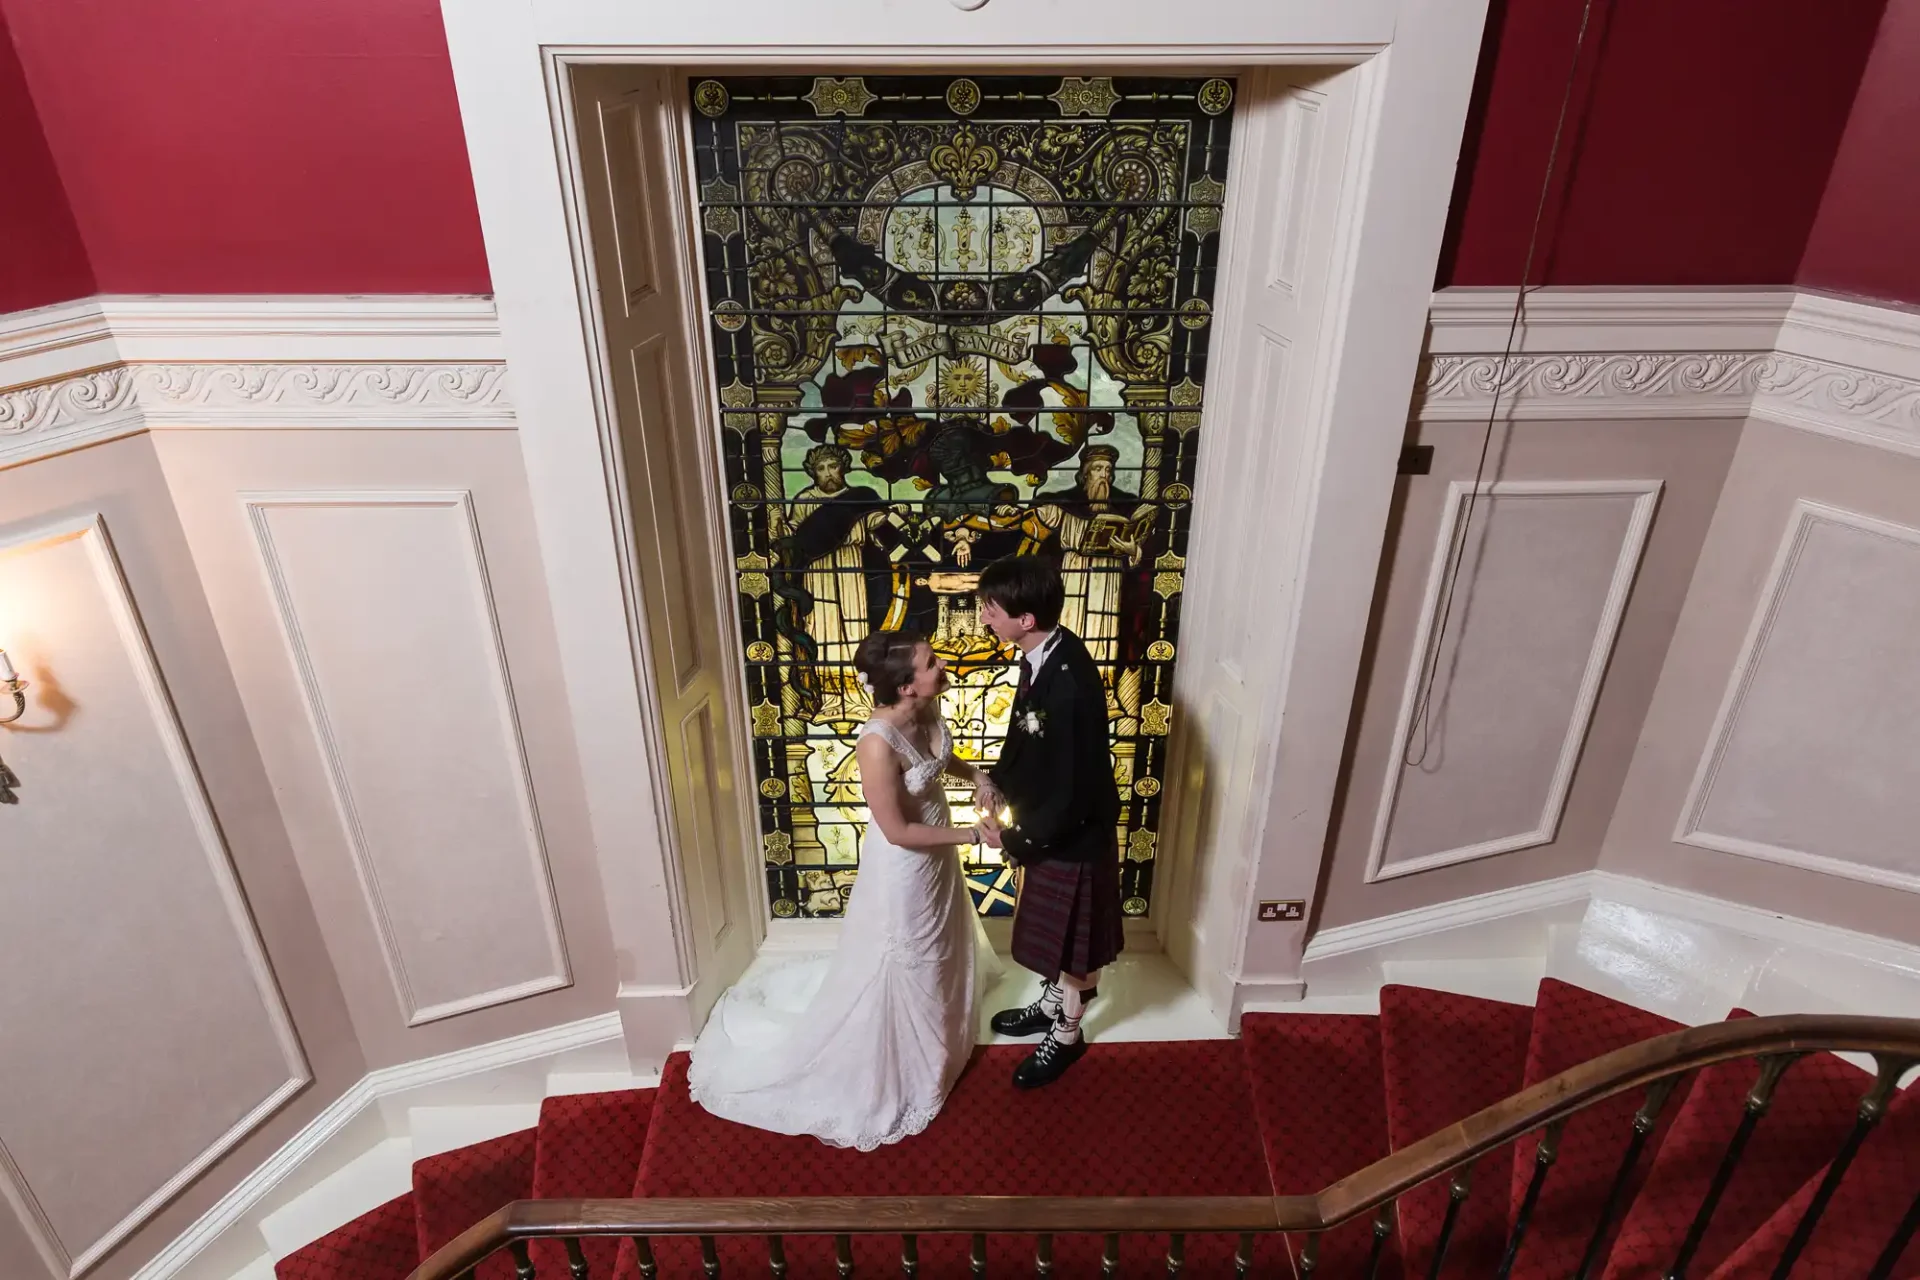 Bride in white dress and groom in kilt standing at the bottom of a grand staircase beneath an elaborate stained glass window, inside an elegant hall.